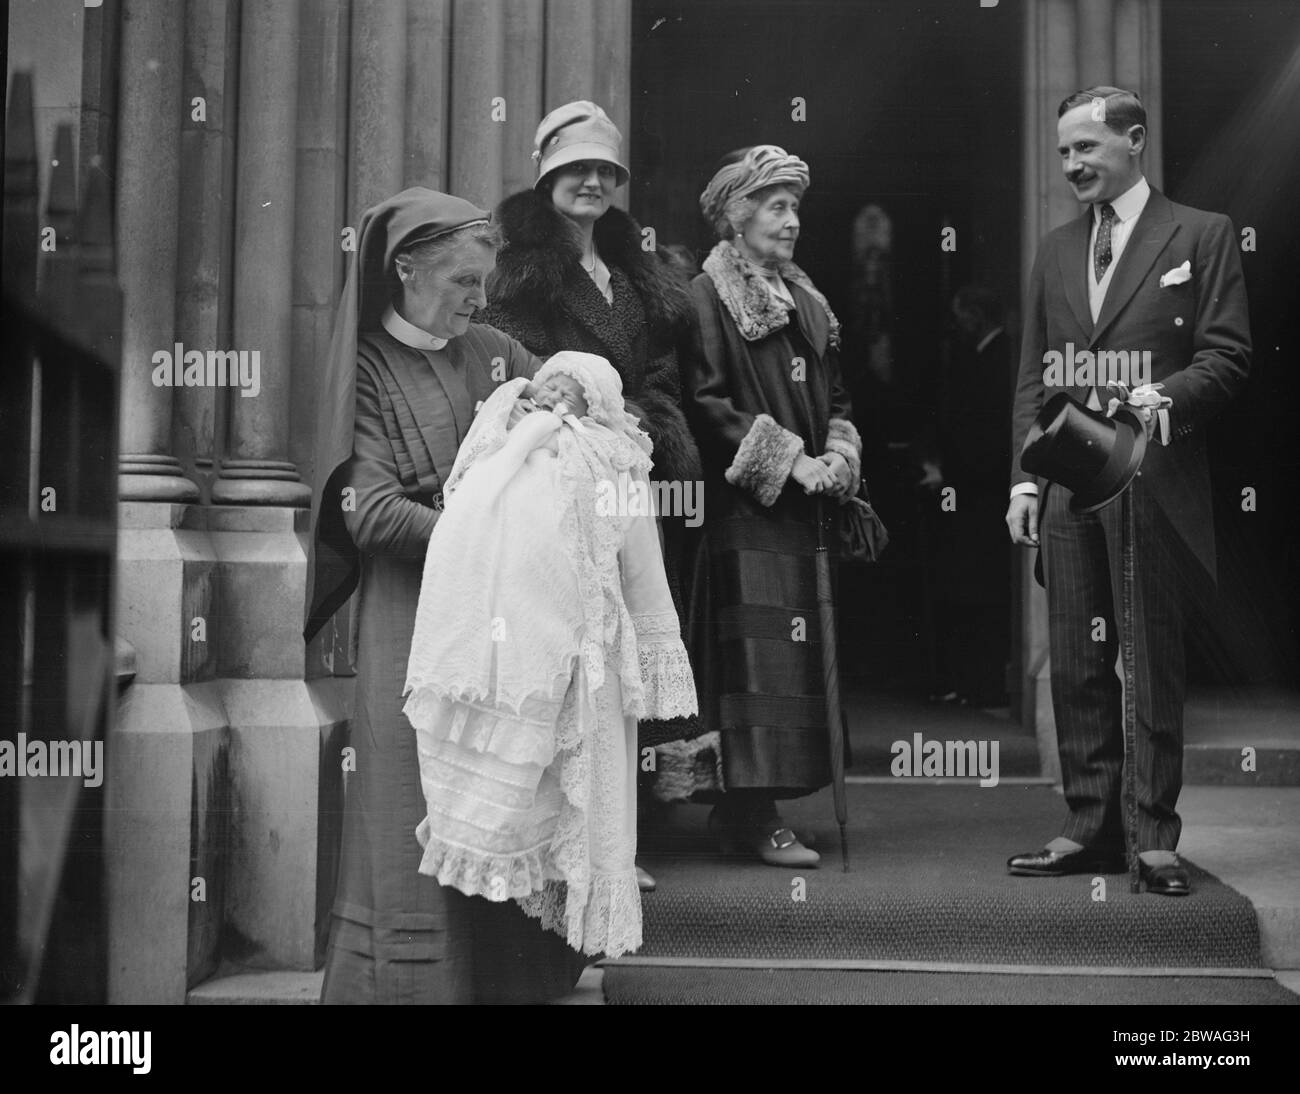 Christening of infant son of Capt and Mrs Alastair Campbell at St James , Spanish Place . Nurse and baby , Mrs Campbell , Princess Louise Duchess of Argyll , Captain Alastair Campbell . 16 April 1926 The Princess Louise (born Louise Caroline Alberta, also known as Marchioness of Lorne and Duchess of Argyll by marriage; 18 March 1848 - 3 December 1939) was a member of the British Royal Family, the sixth child and fourth daughter of Queen Victoria Stock Photo